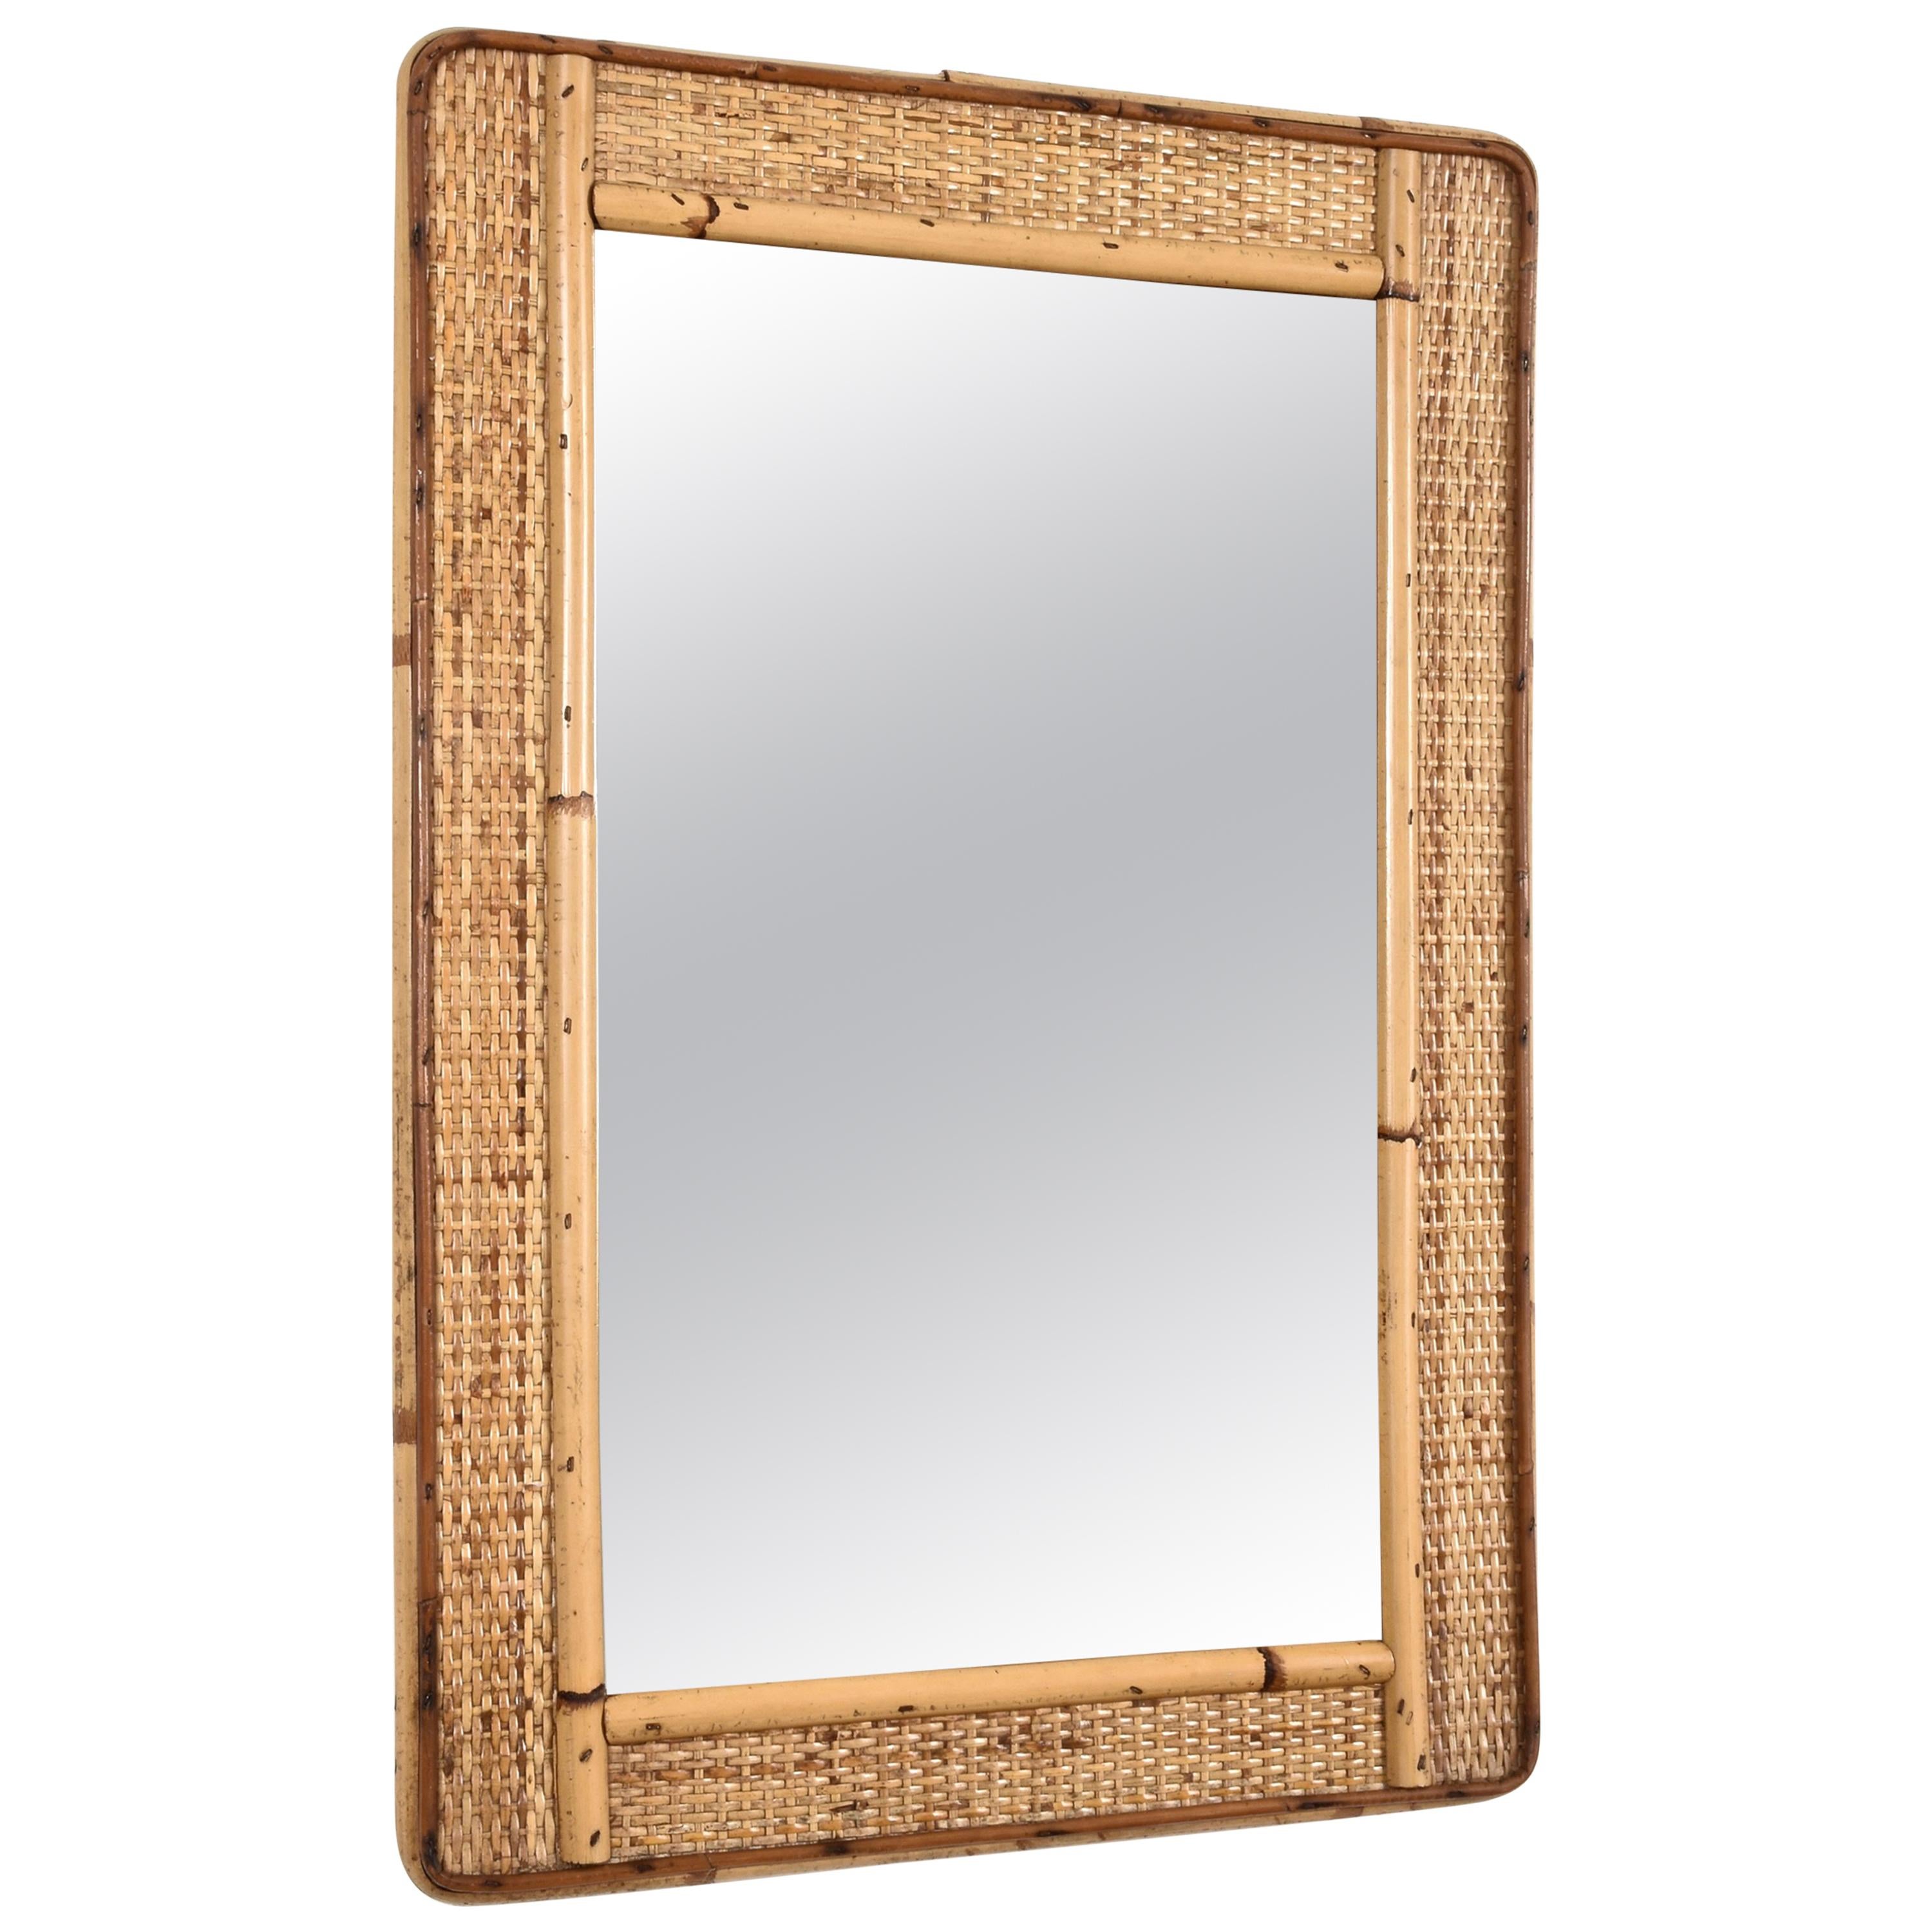 The Rectangular Mirror with Bamboo Wicker Woven Frame from the 1970s, Italy